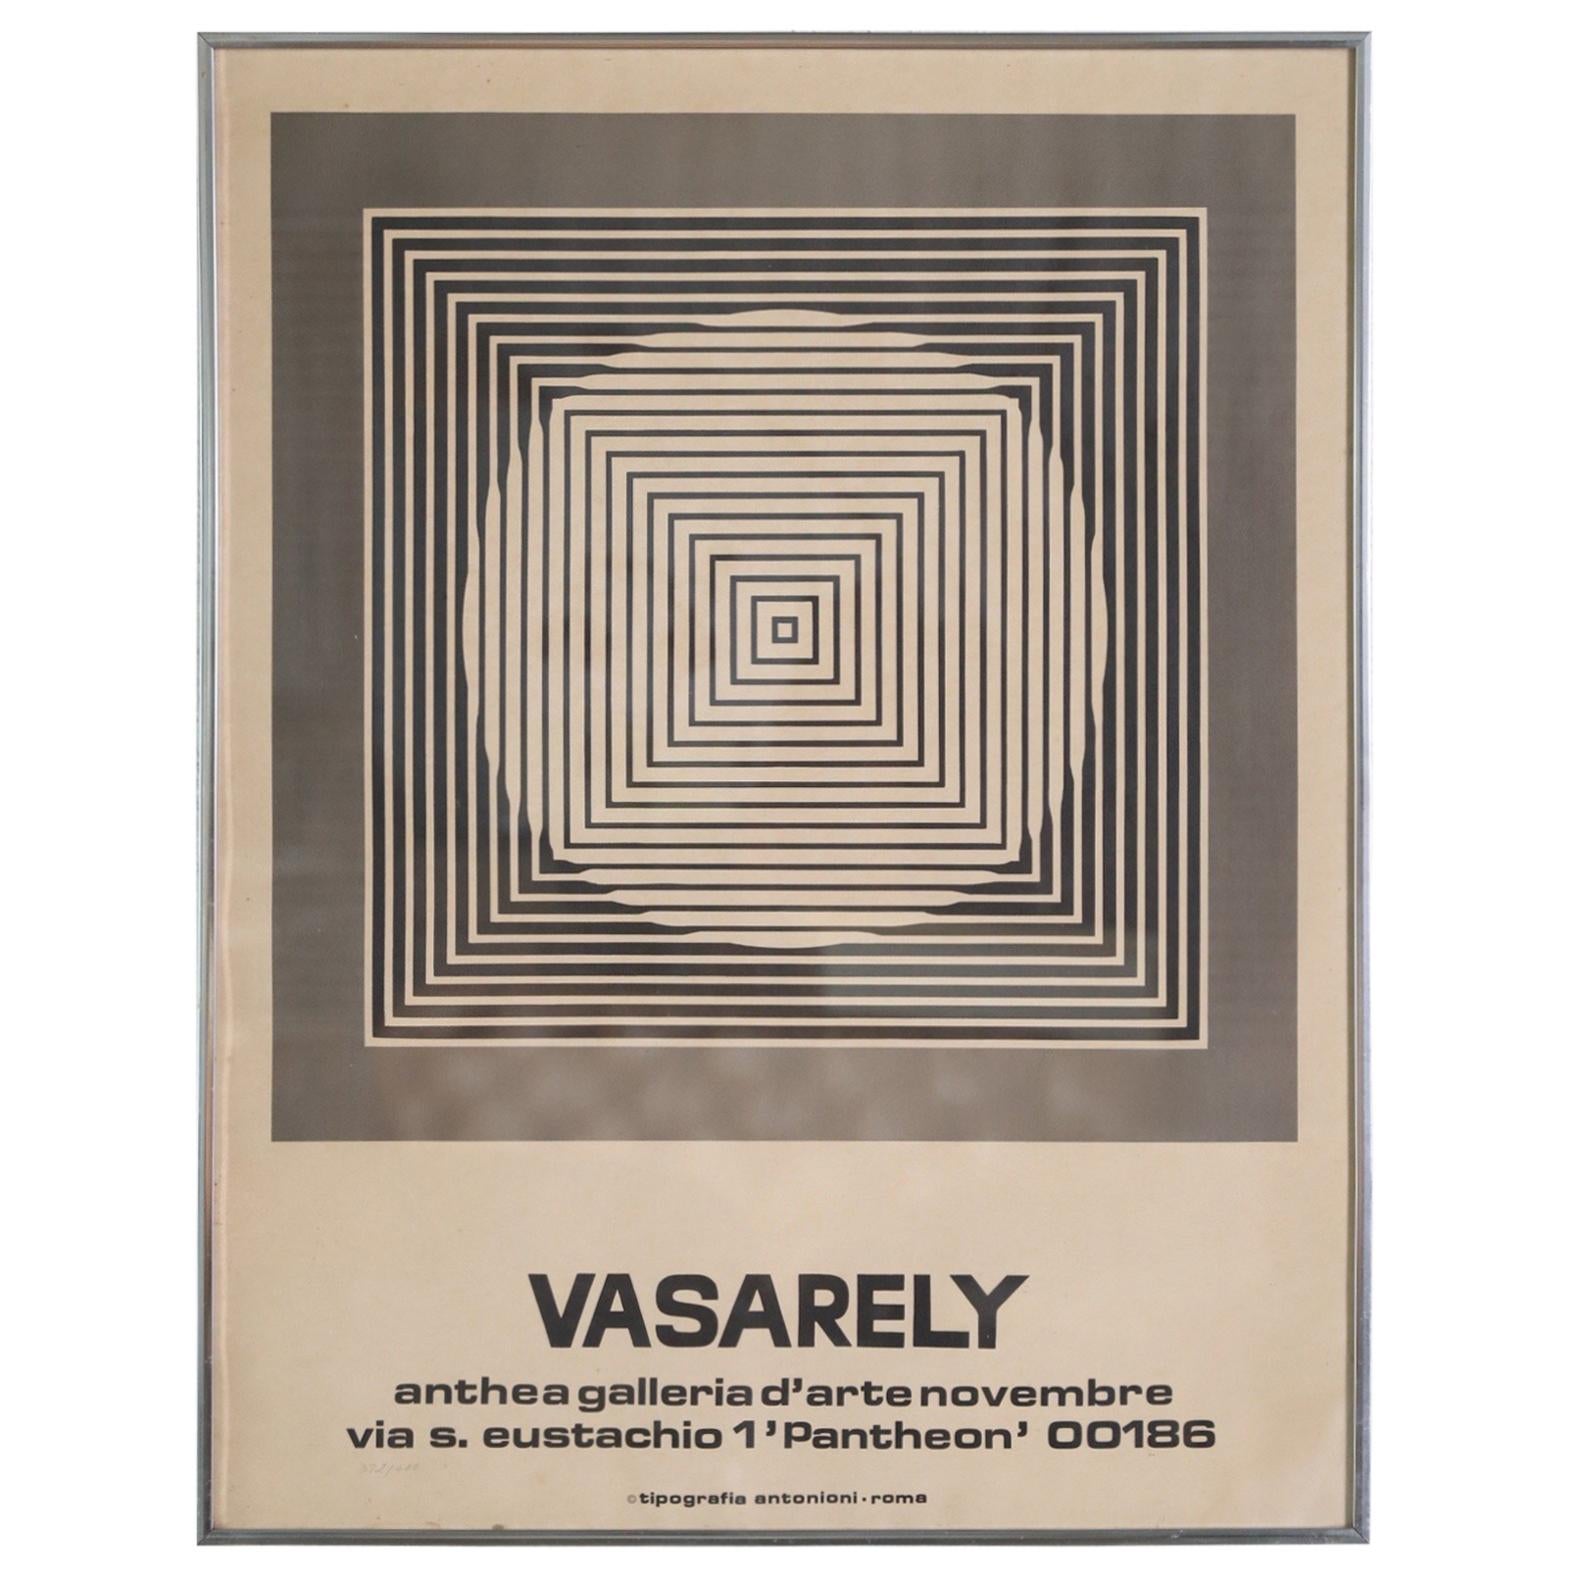 Numbered Vasarely Anthea Galleria Poster